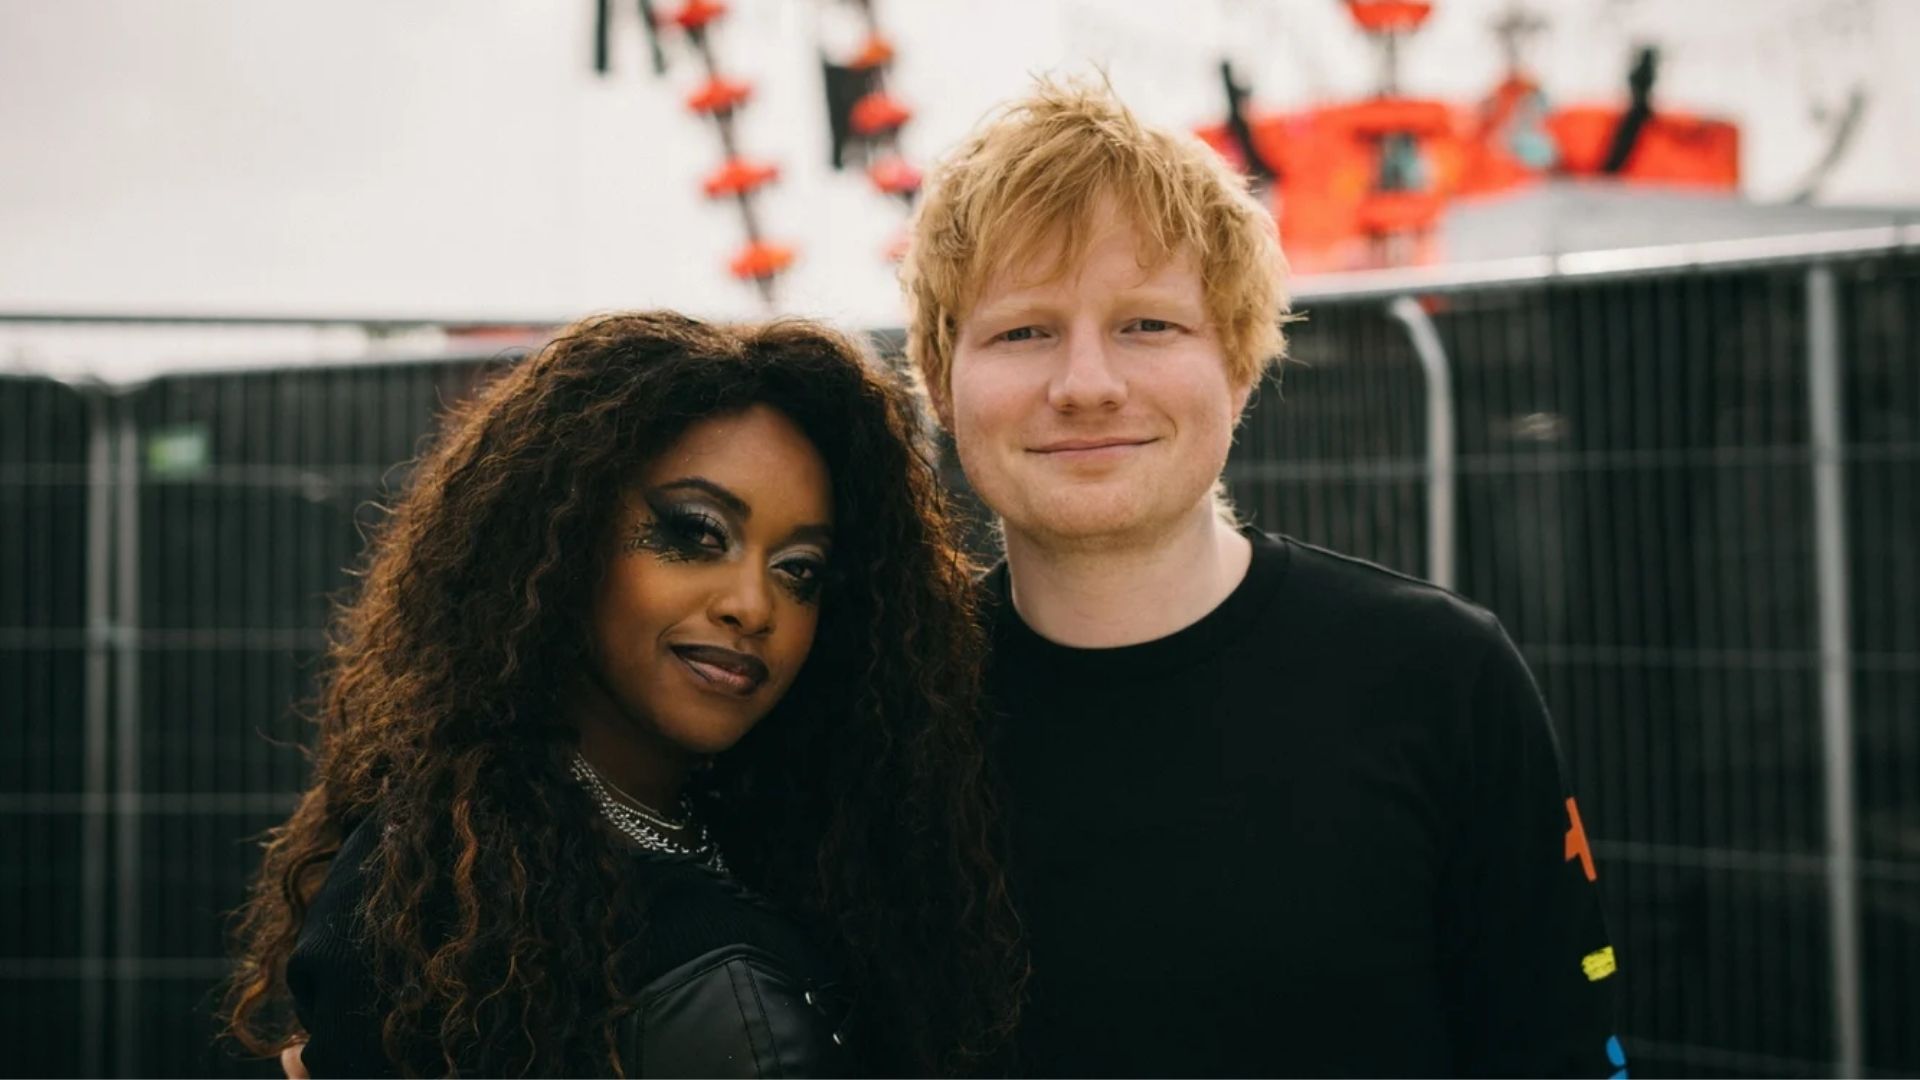 Denise Chaila Ed Sheeran collaboration - Limerick Rapper Denise Chaila pictured above with Ed Sheeran during the Mathematics Tour